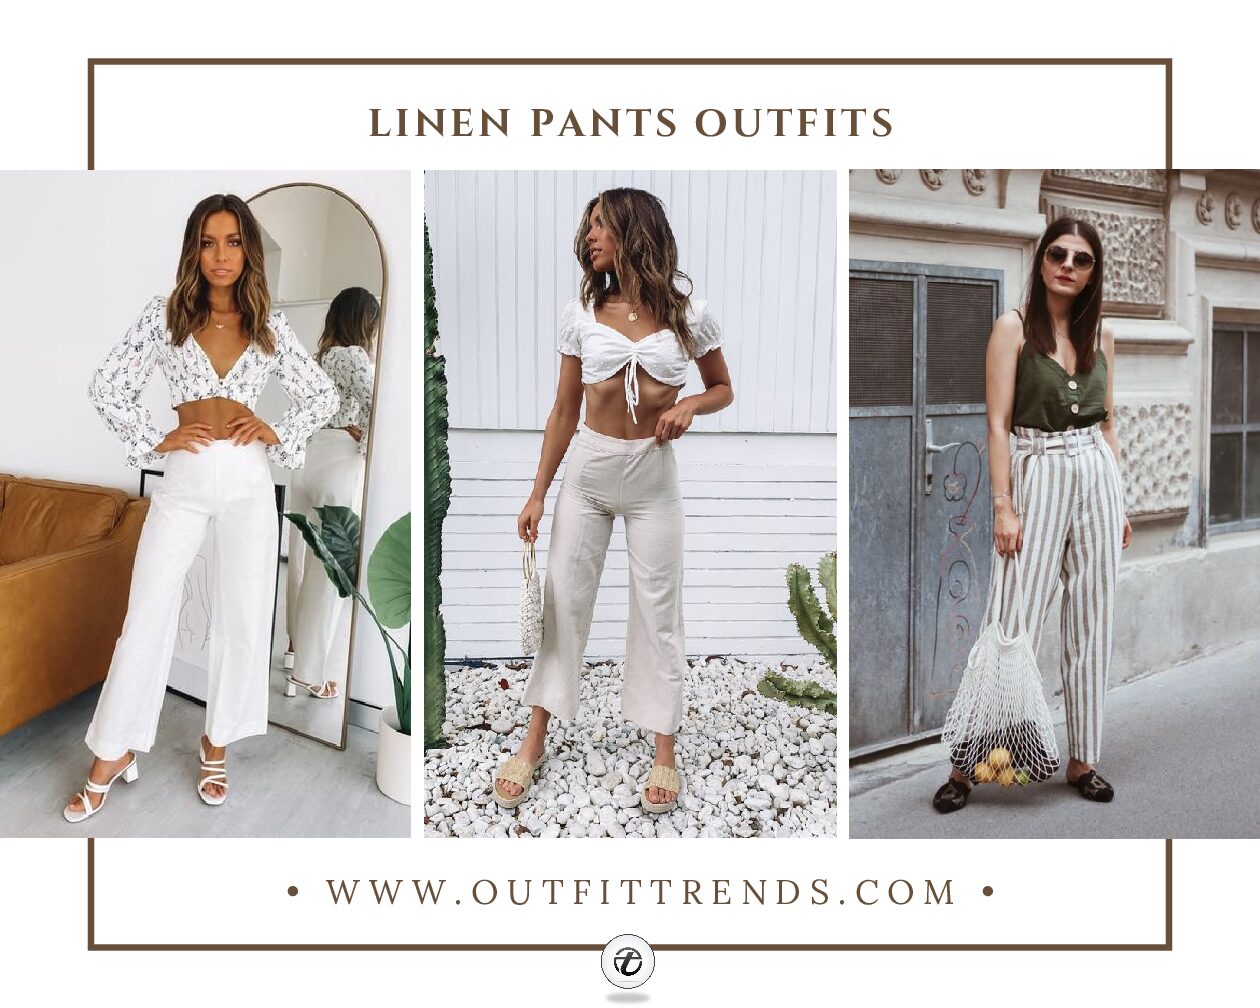 Linen Pants Outfits – 20 Ideas on How To Wear Linen Pants